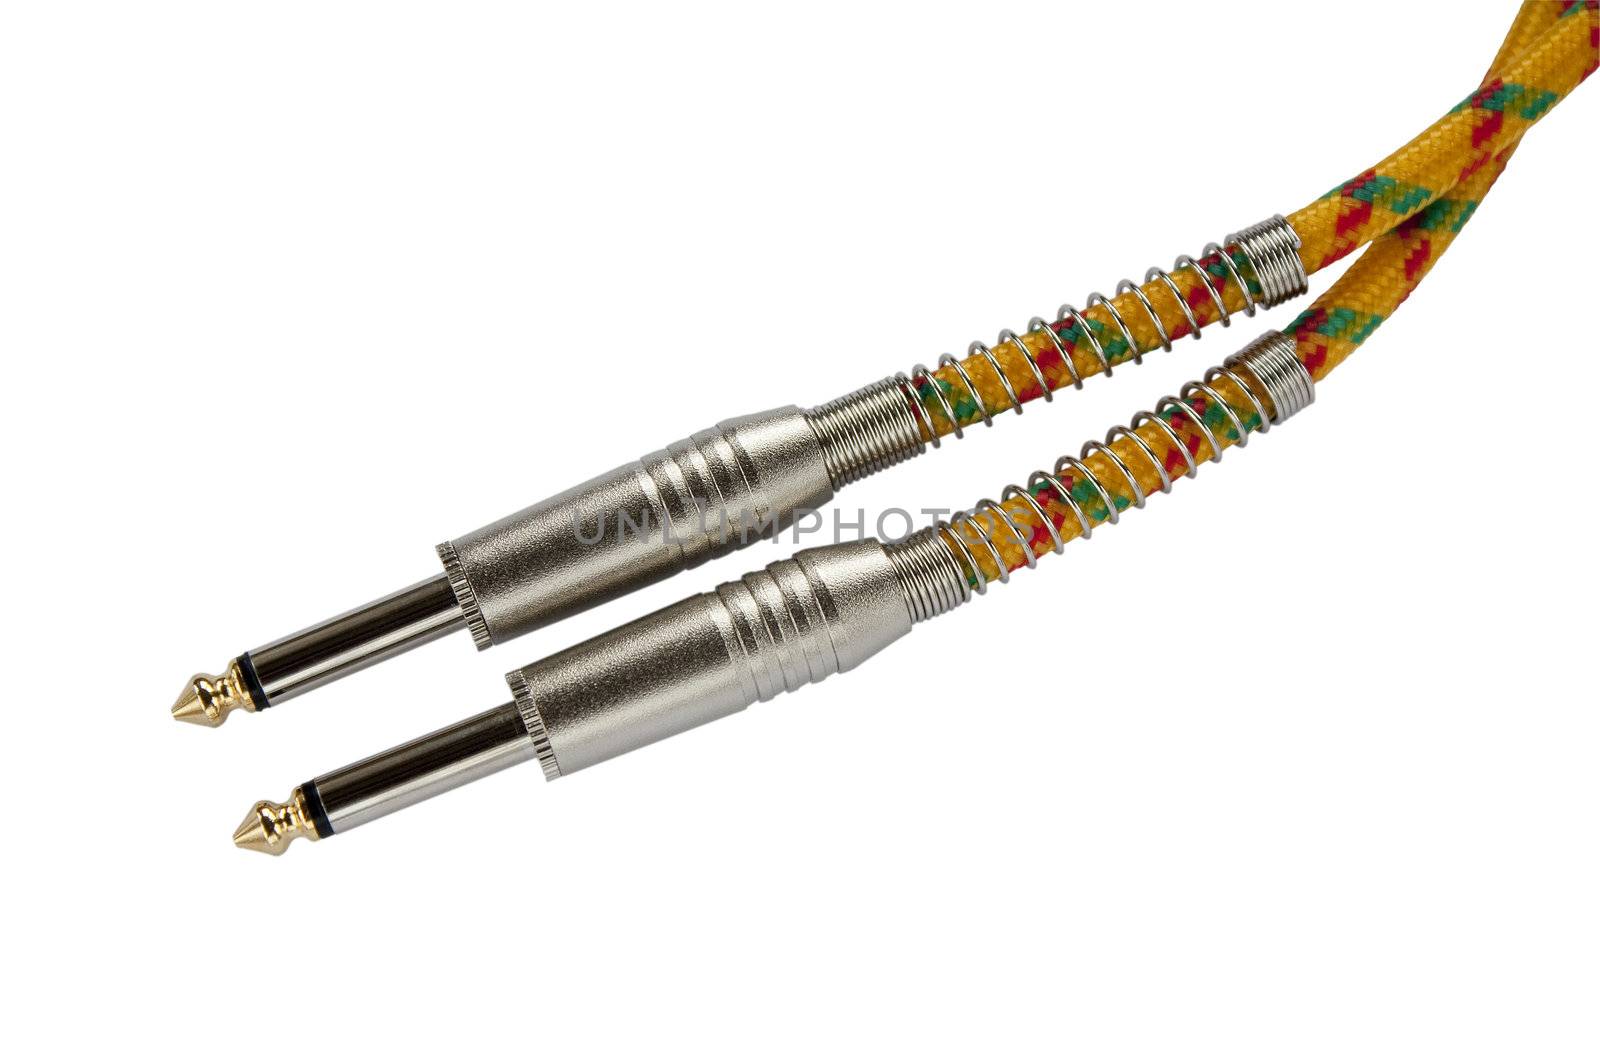 Tweed cable and chrome plugs for connecting musical instruments to amplifiers isolated on white background.